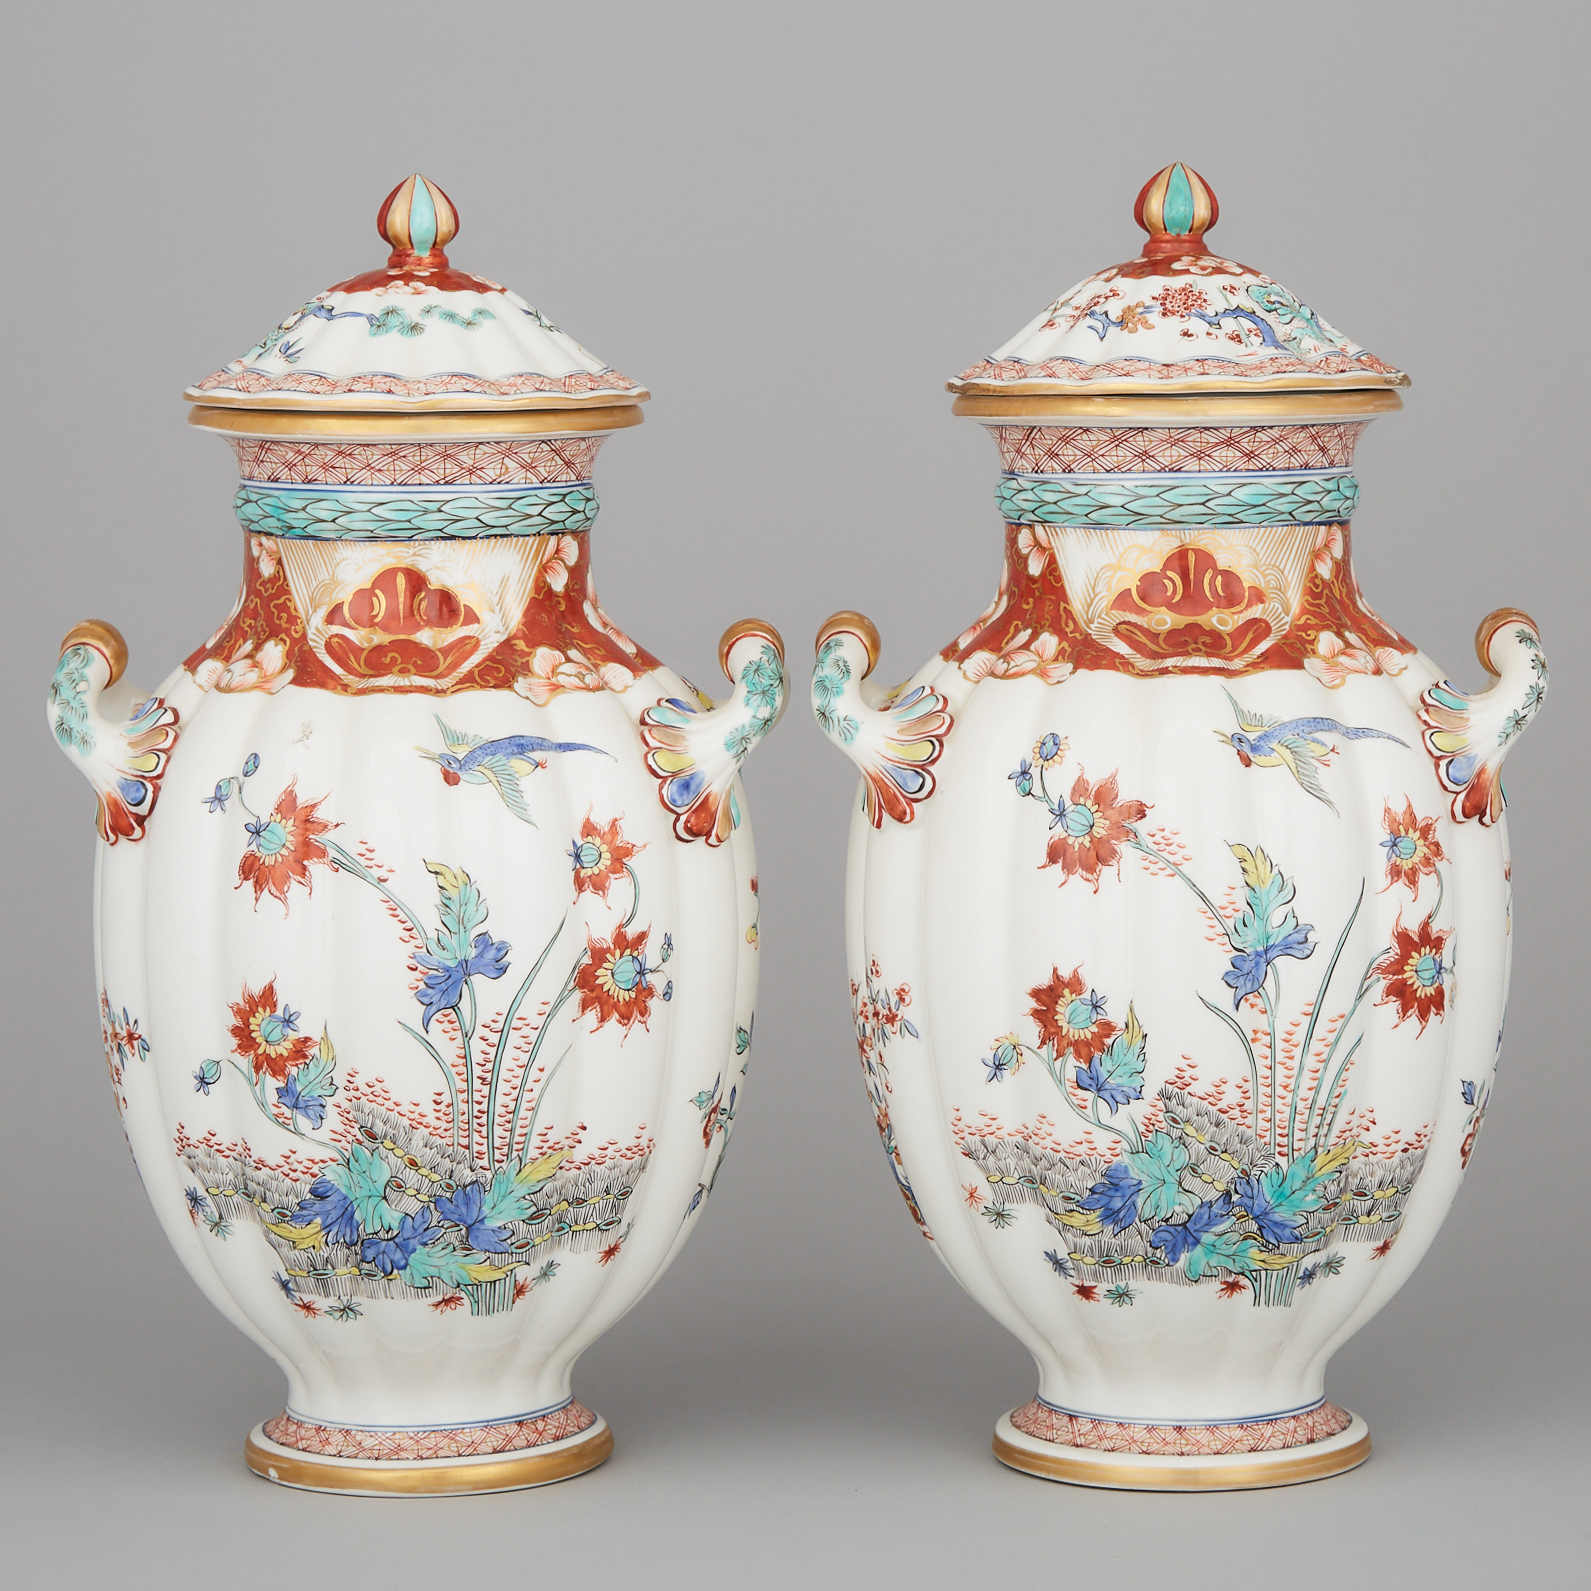 Pair of Samson Kakiemon Two-Handled Vases and Covers, c.1900